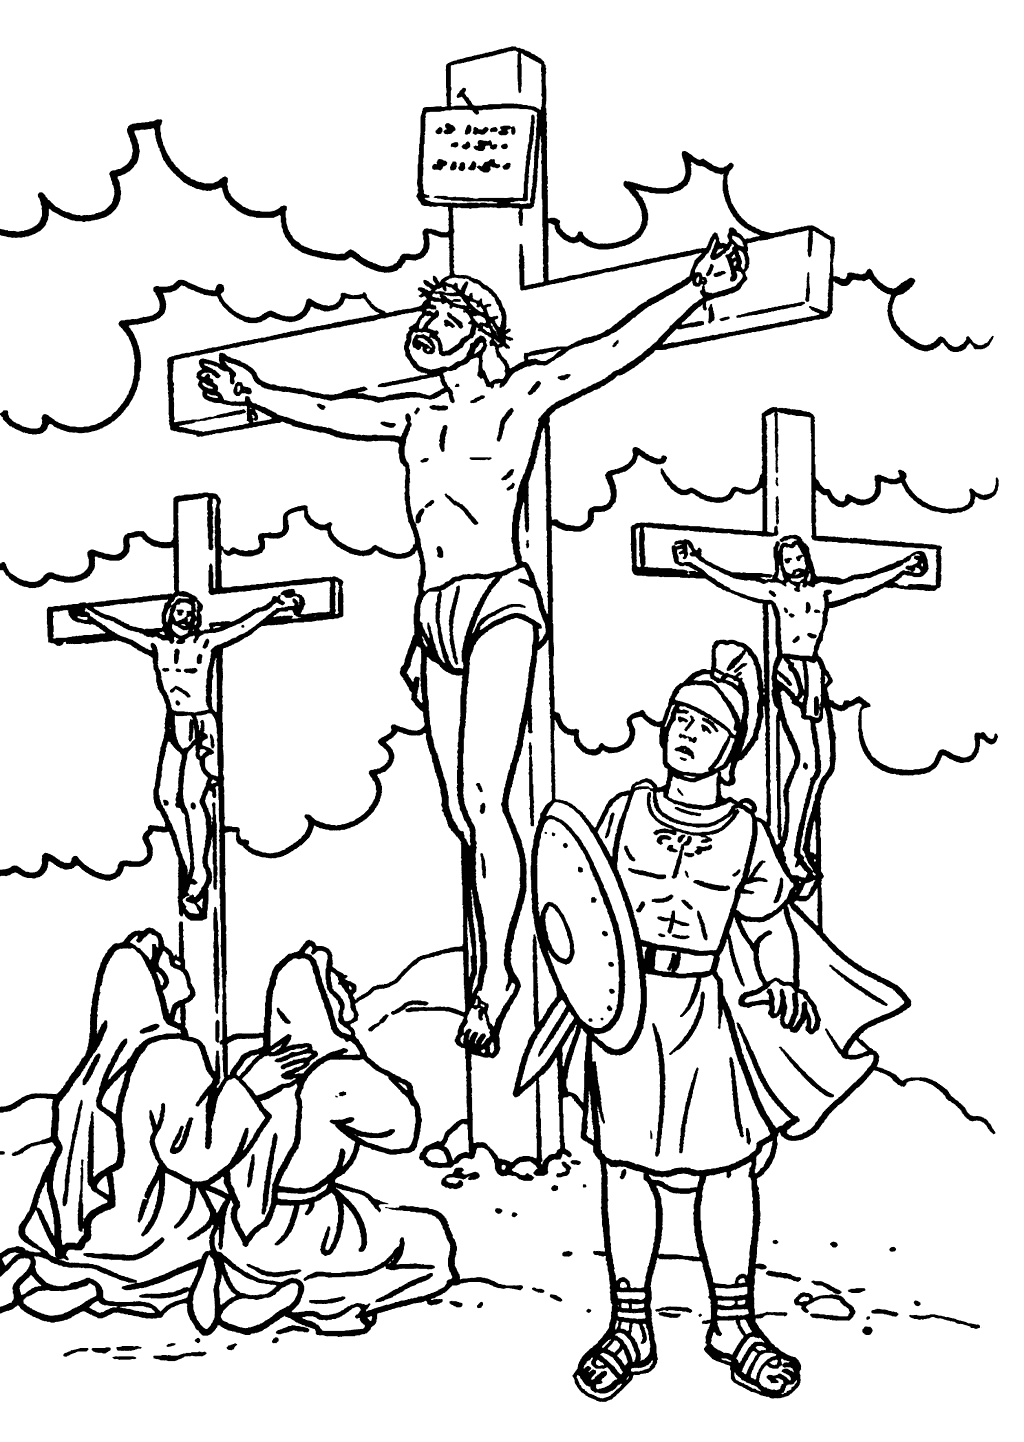 Crucifixion Of Jesus Christ Coloring Page